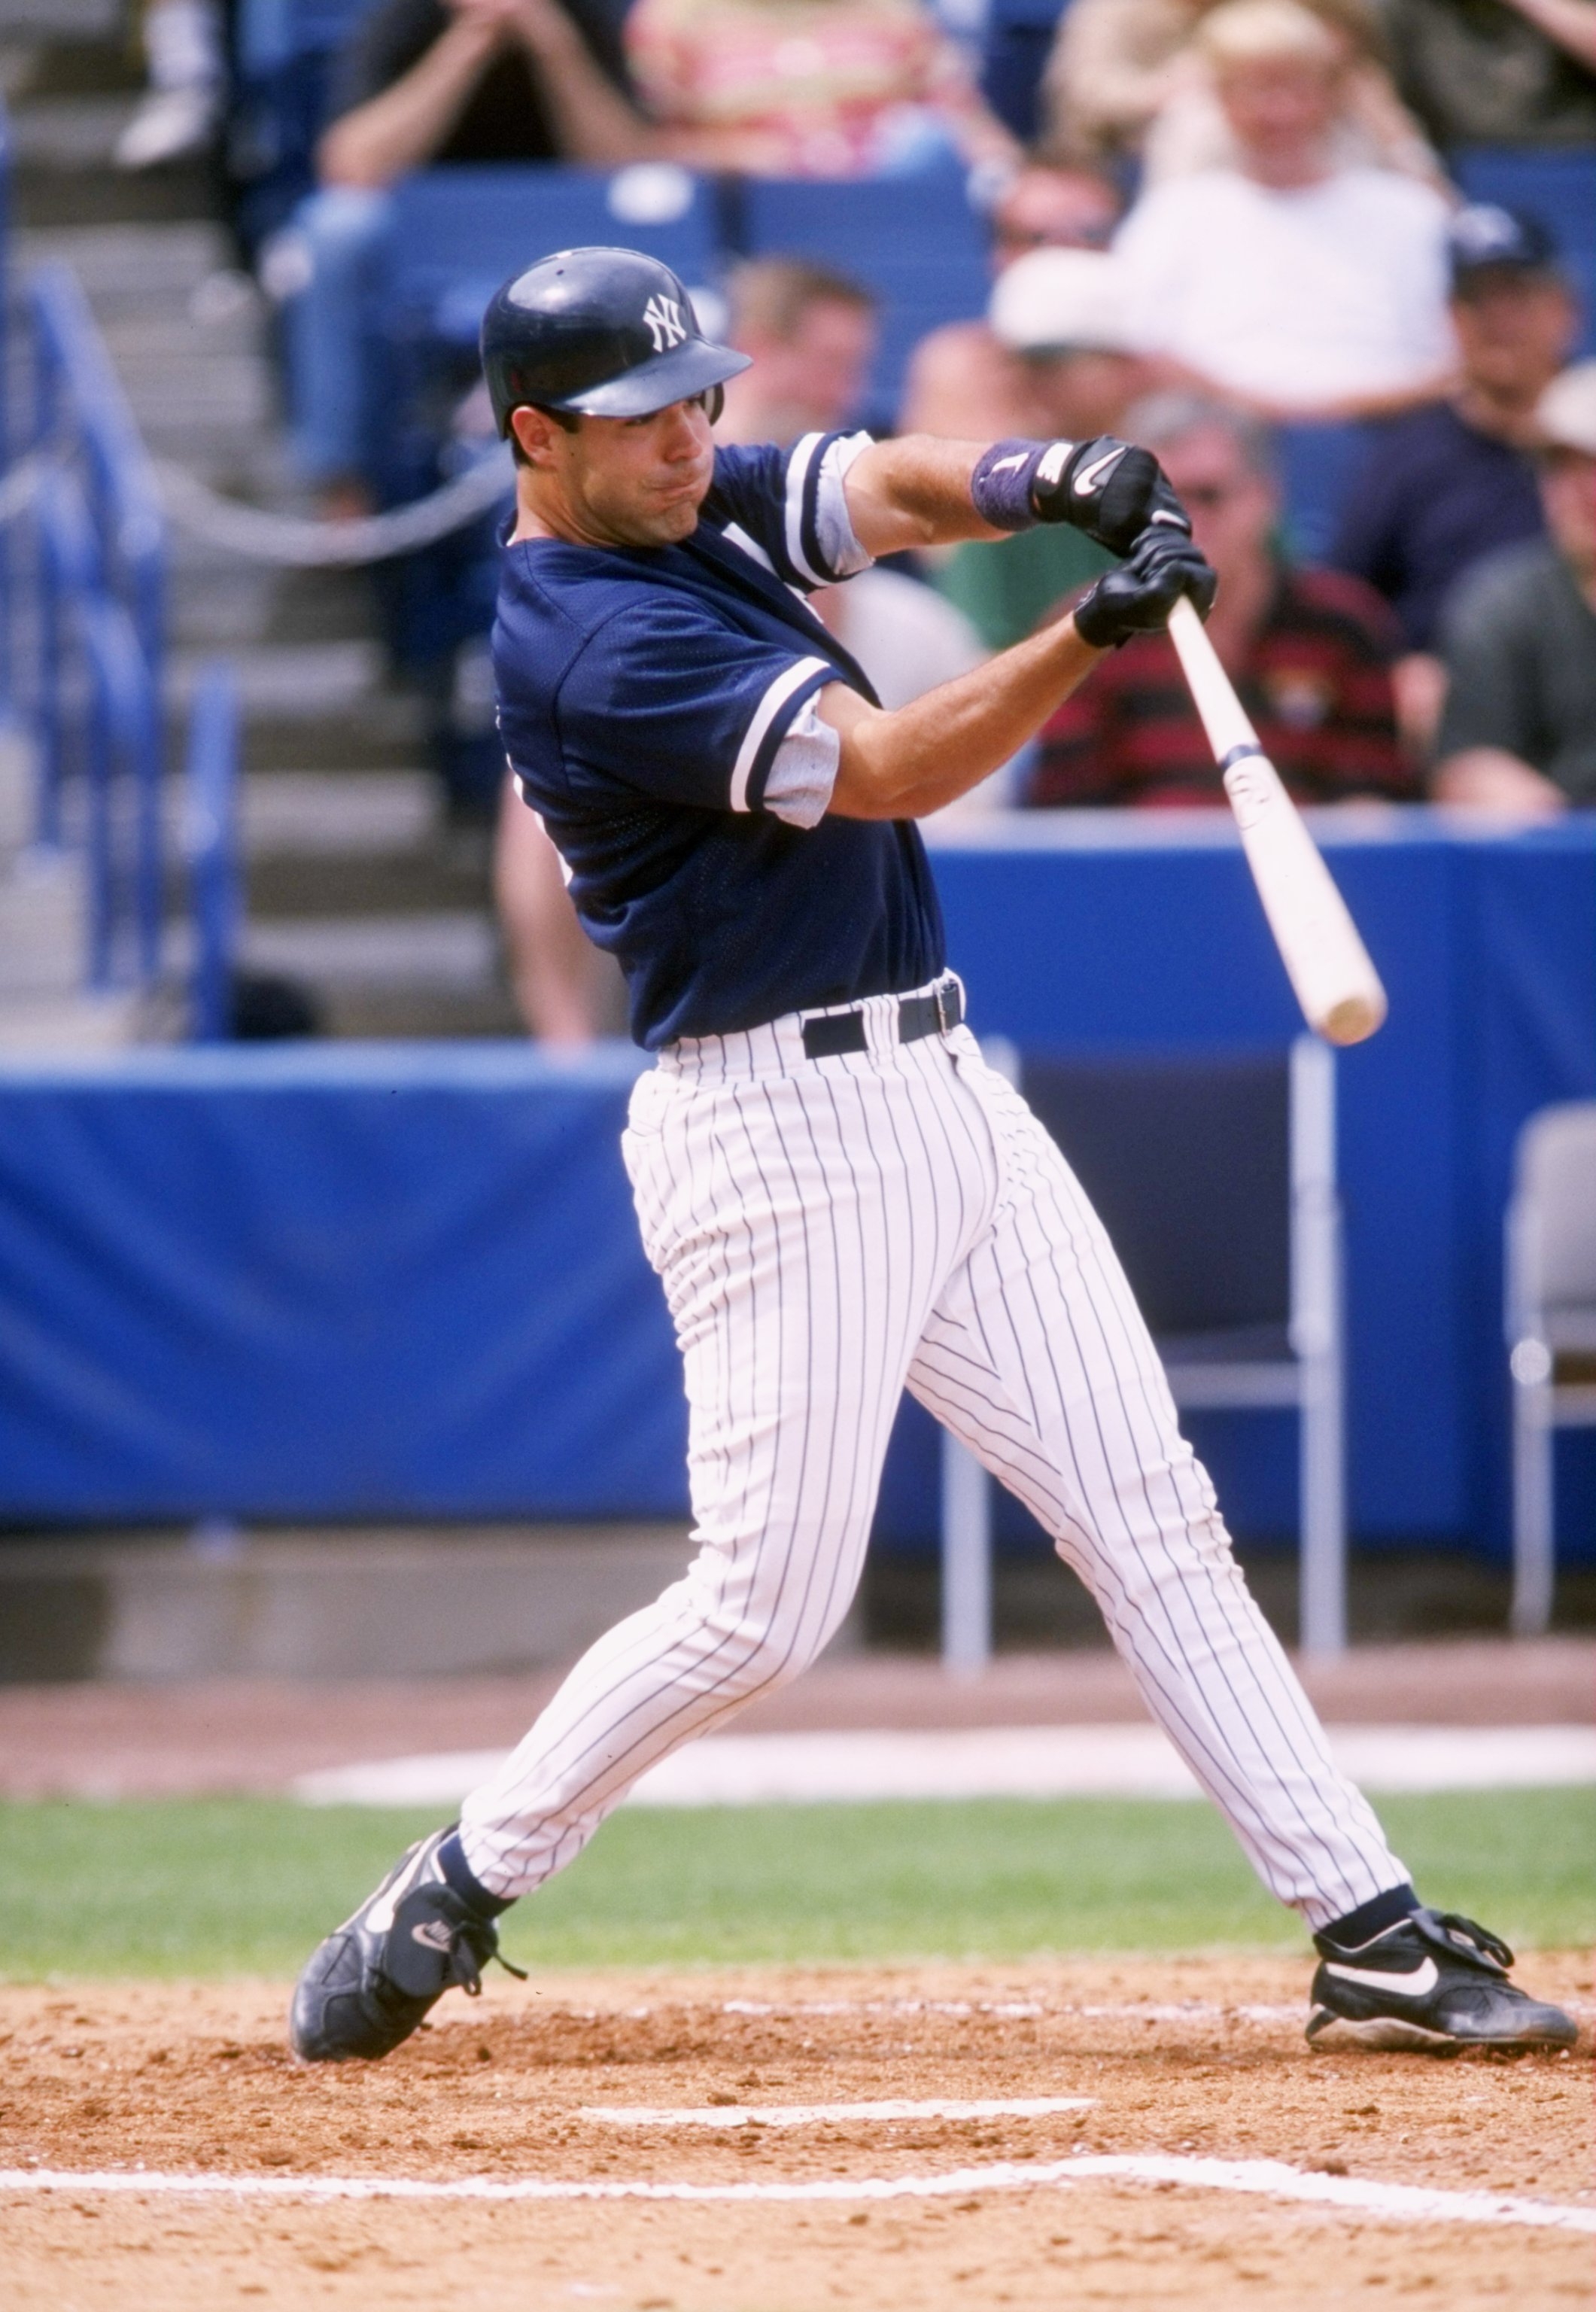 28 Feb 1998: Mike Lowell #80 of the New York Yankees in action during a spring training game against the Pittsburgh Pirates at the Legends Field in Tampa, Florida. The Yankees defeated the Pirates 10-0.